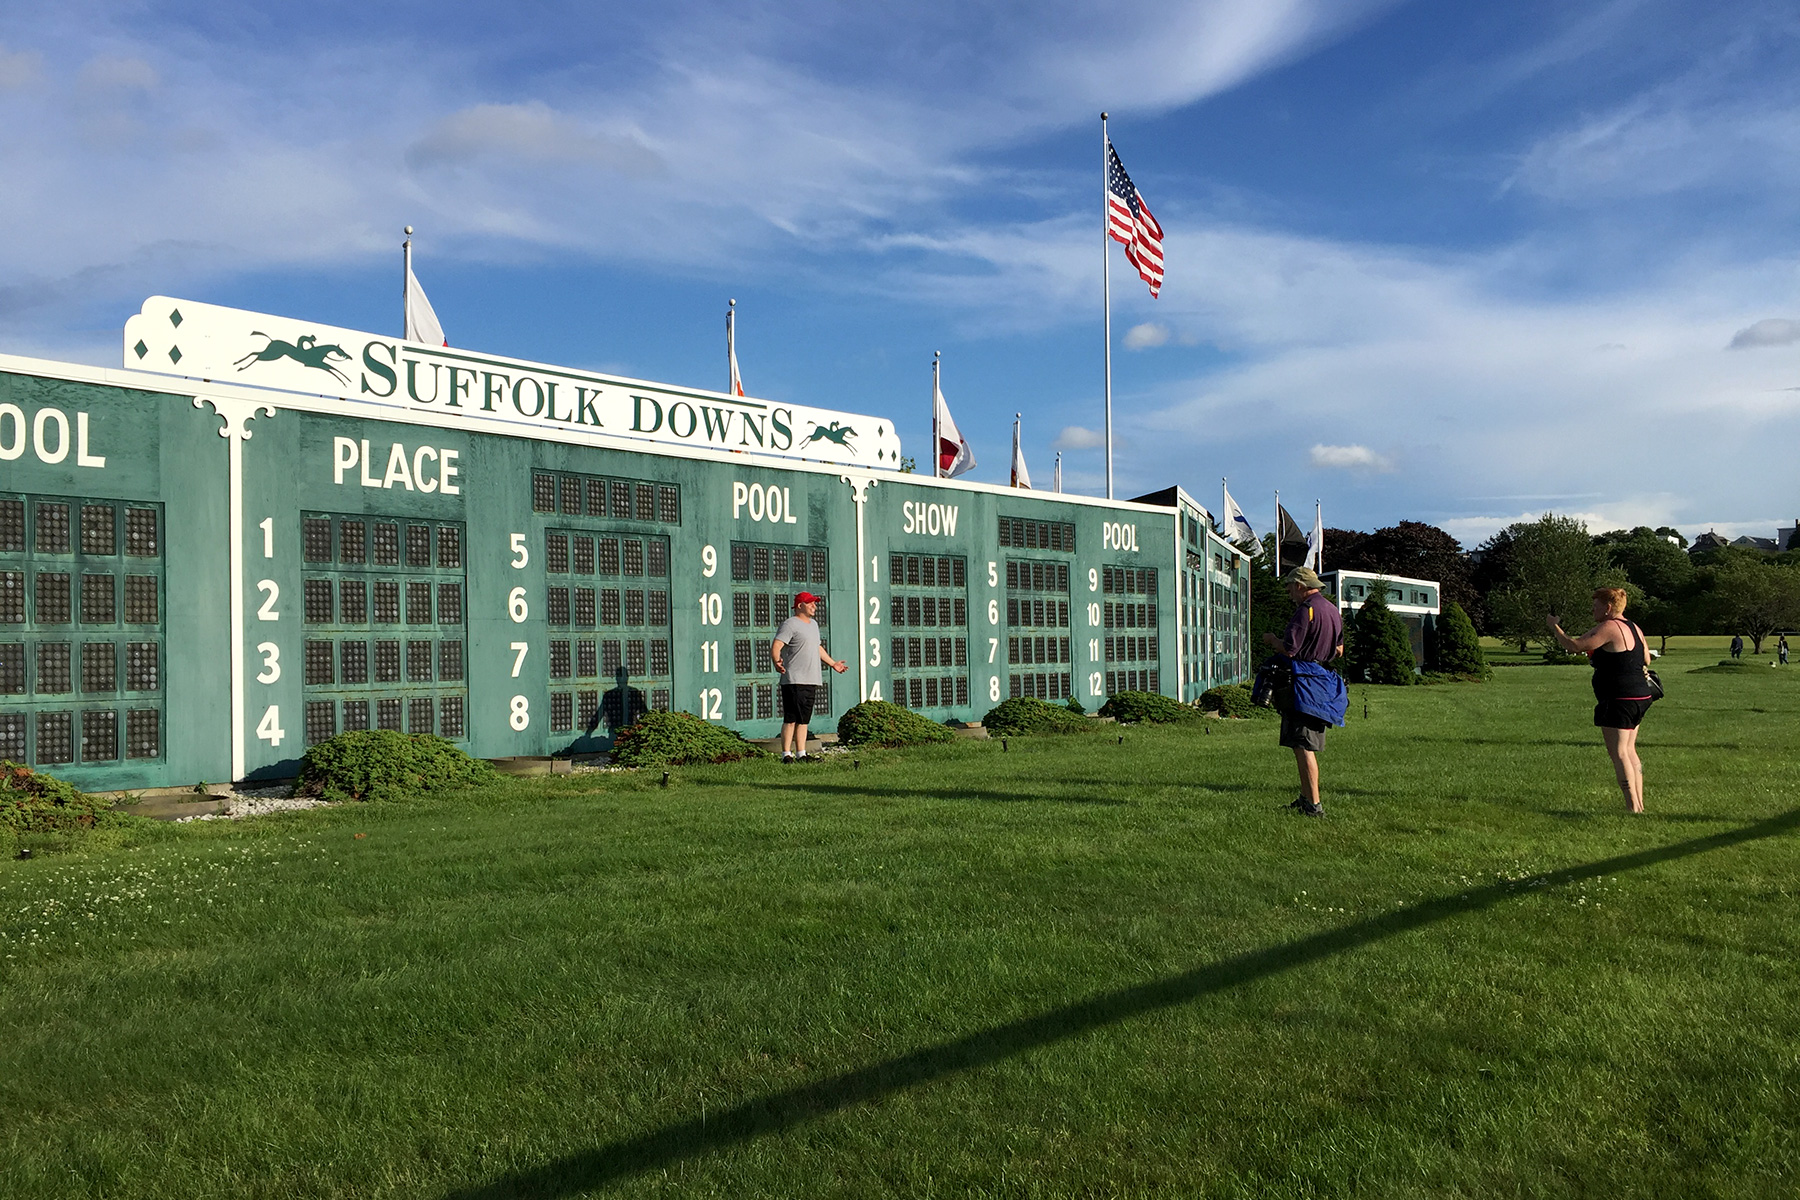 People cross the track to take their photos in front of the infield tote board